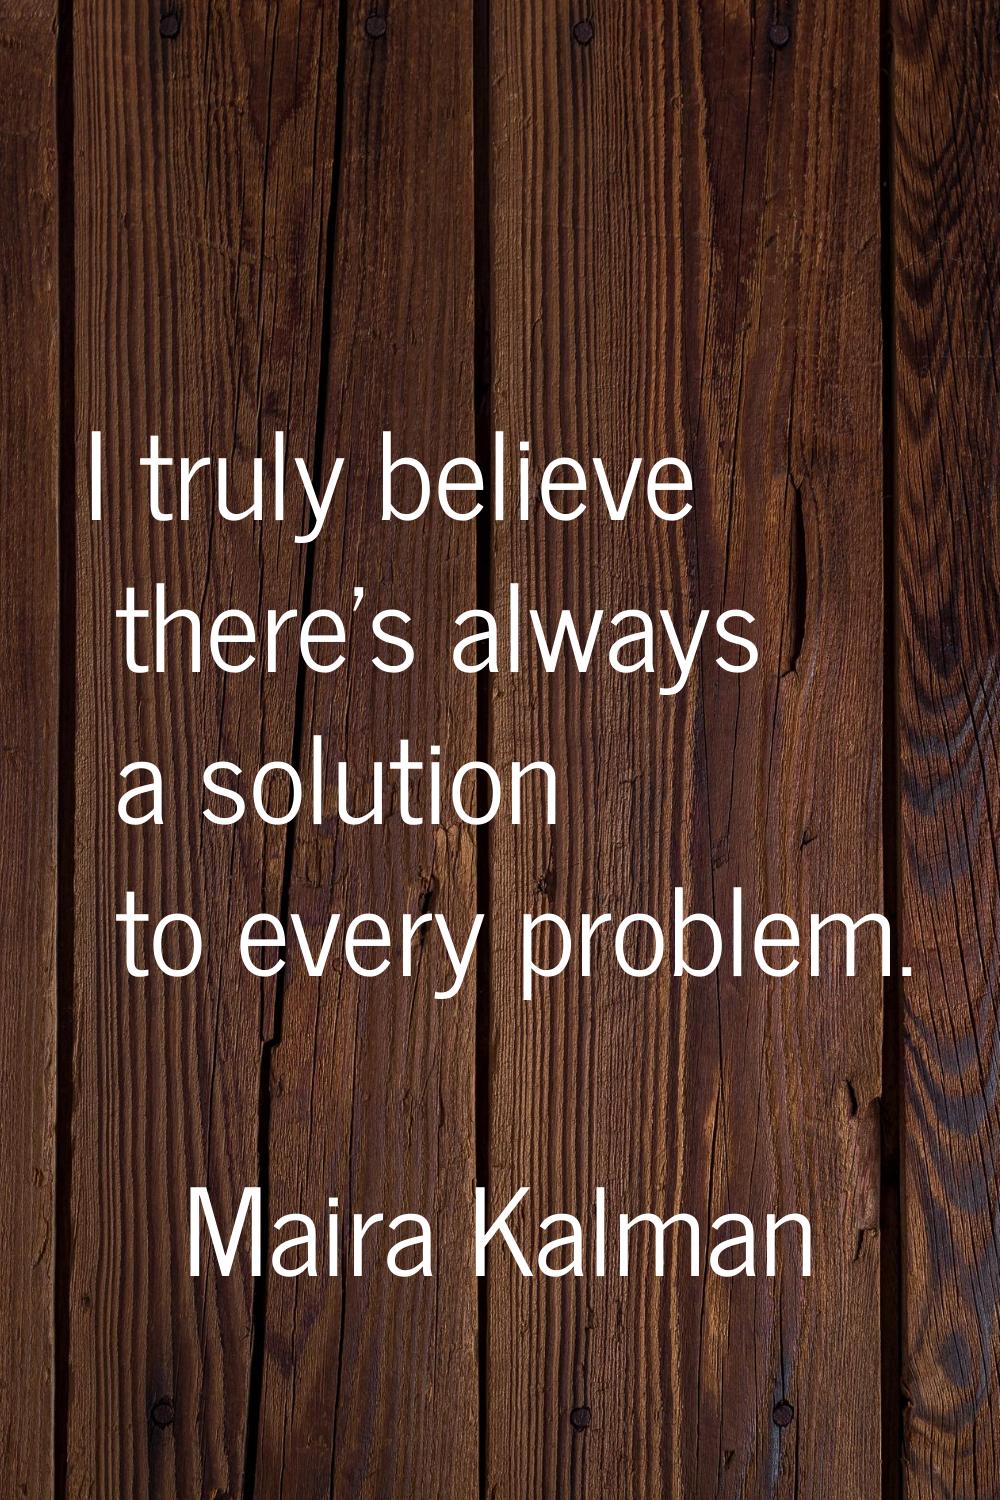 I truly believe there's always a solution to every problem.